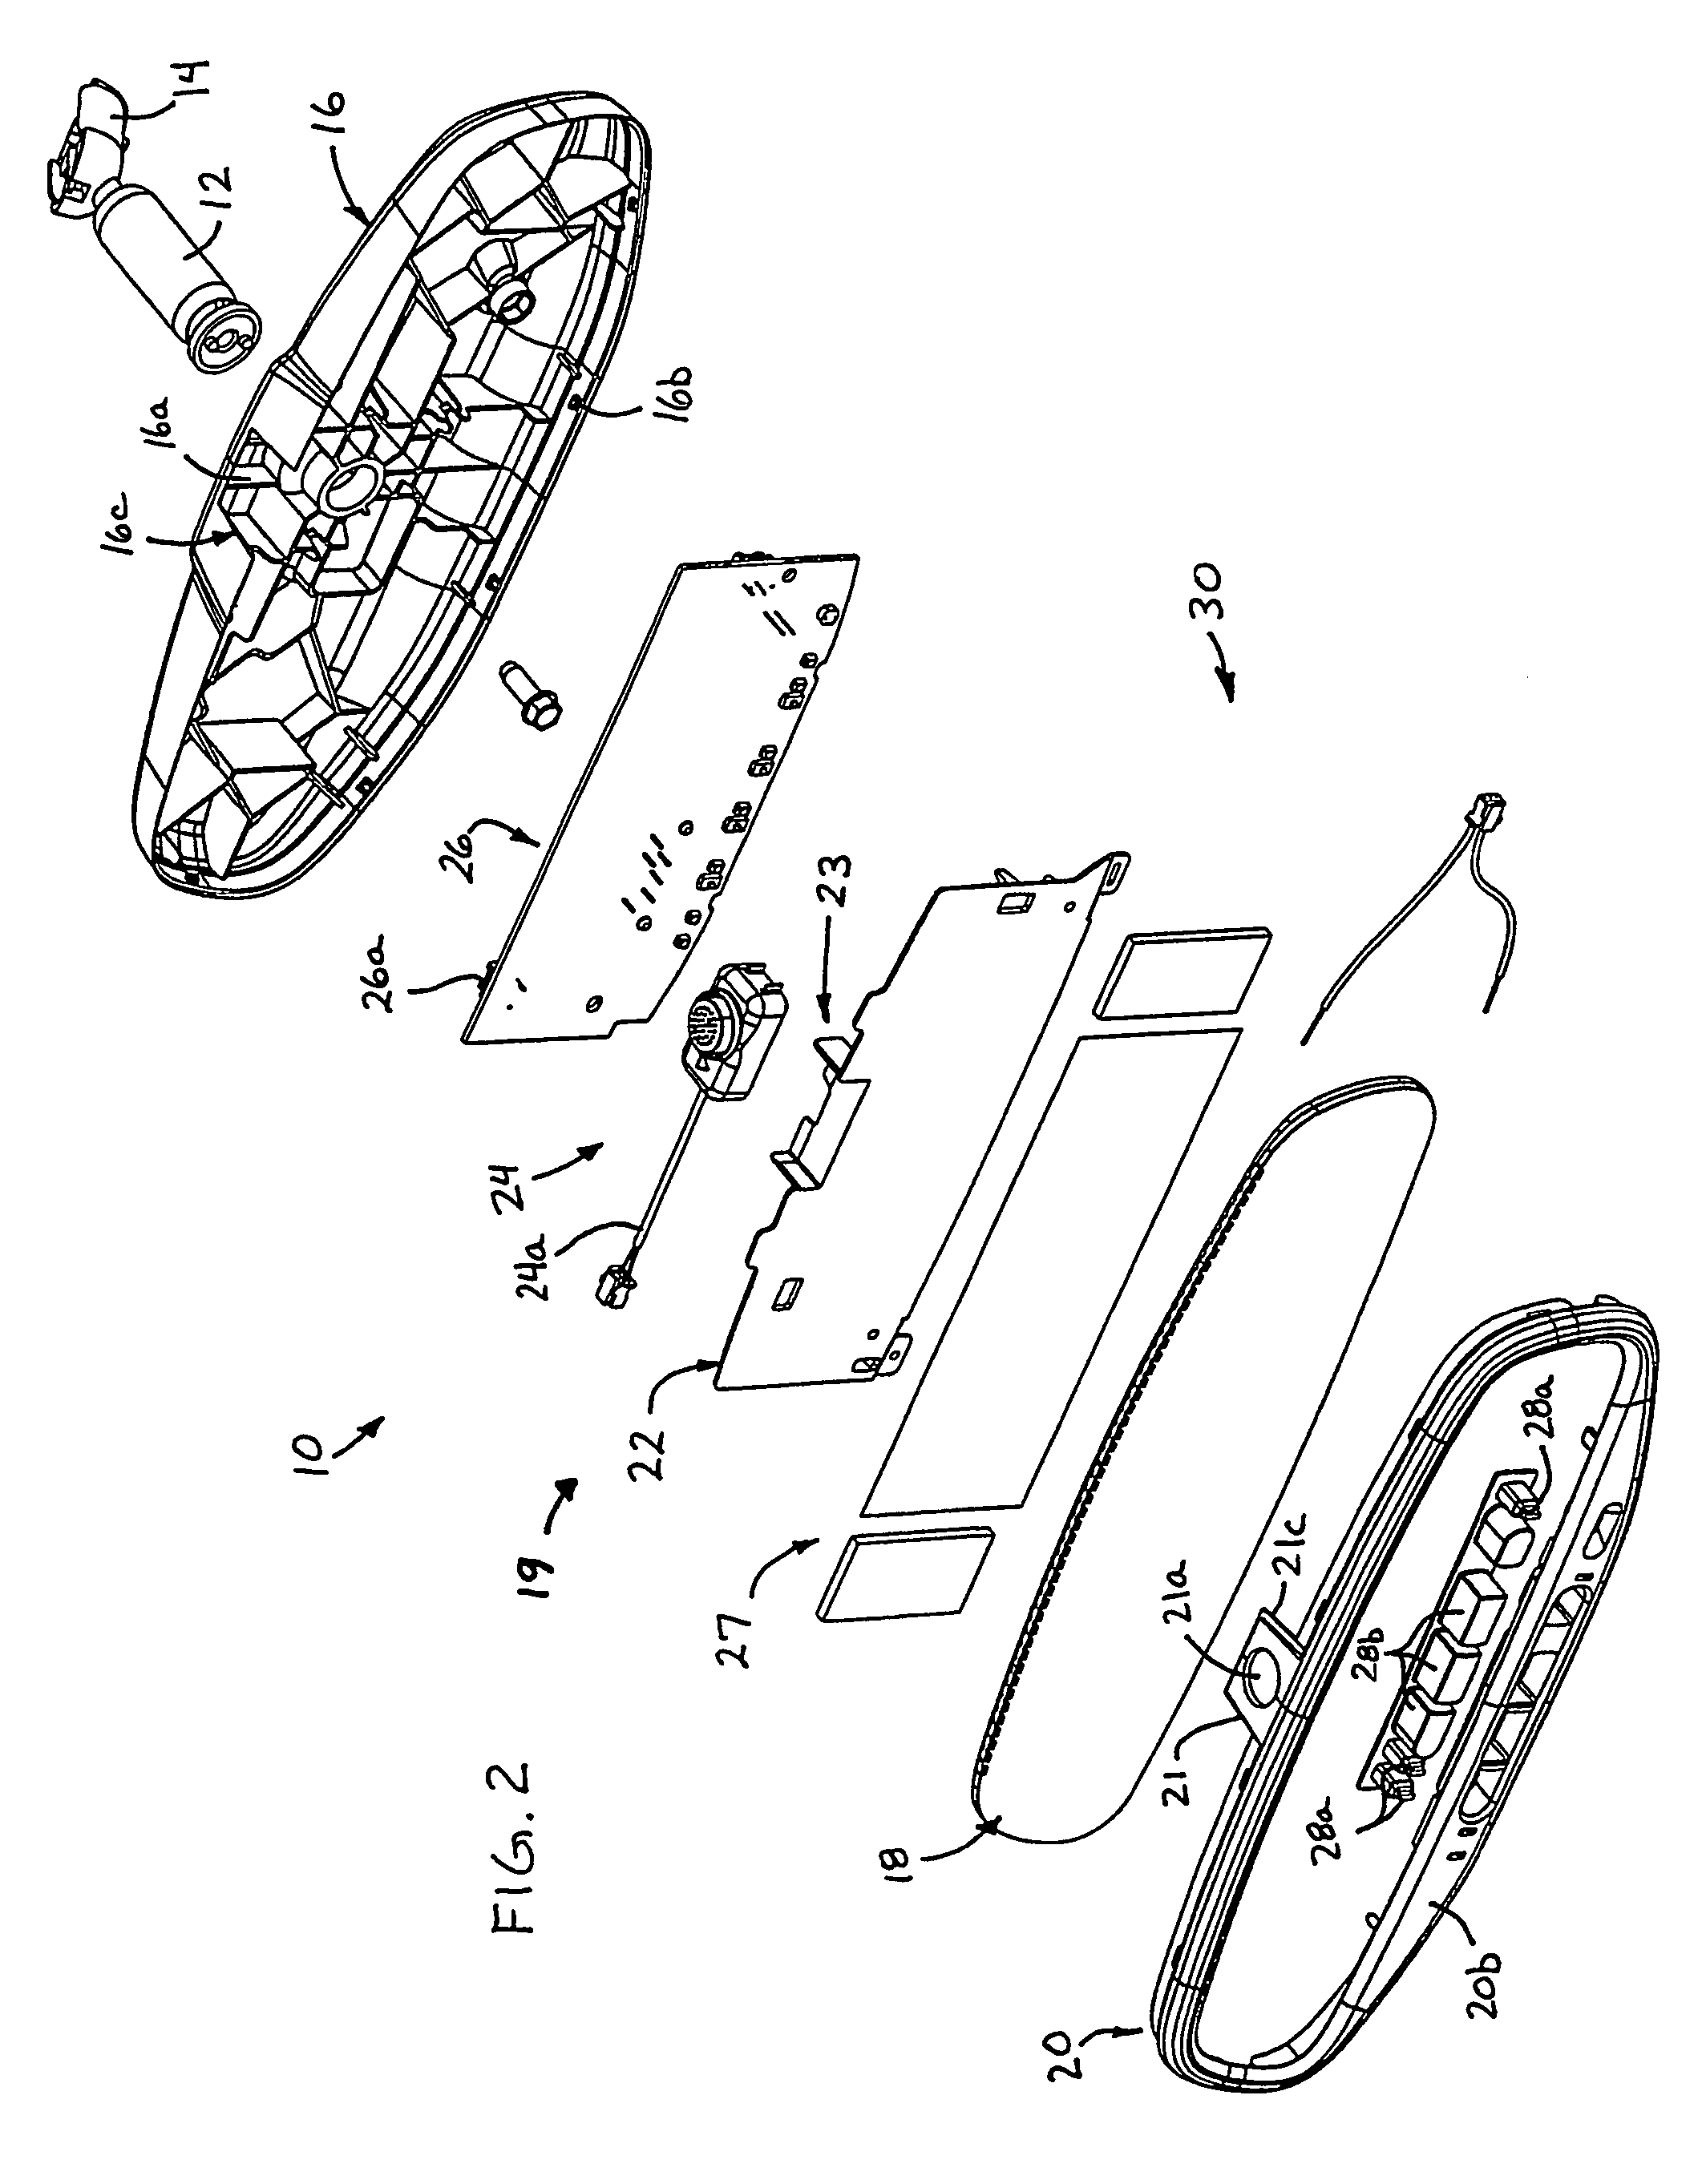 Microphone system for vehicle